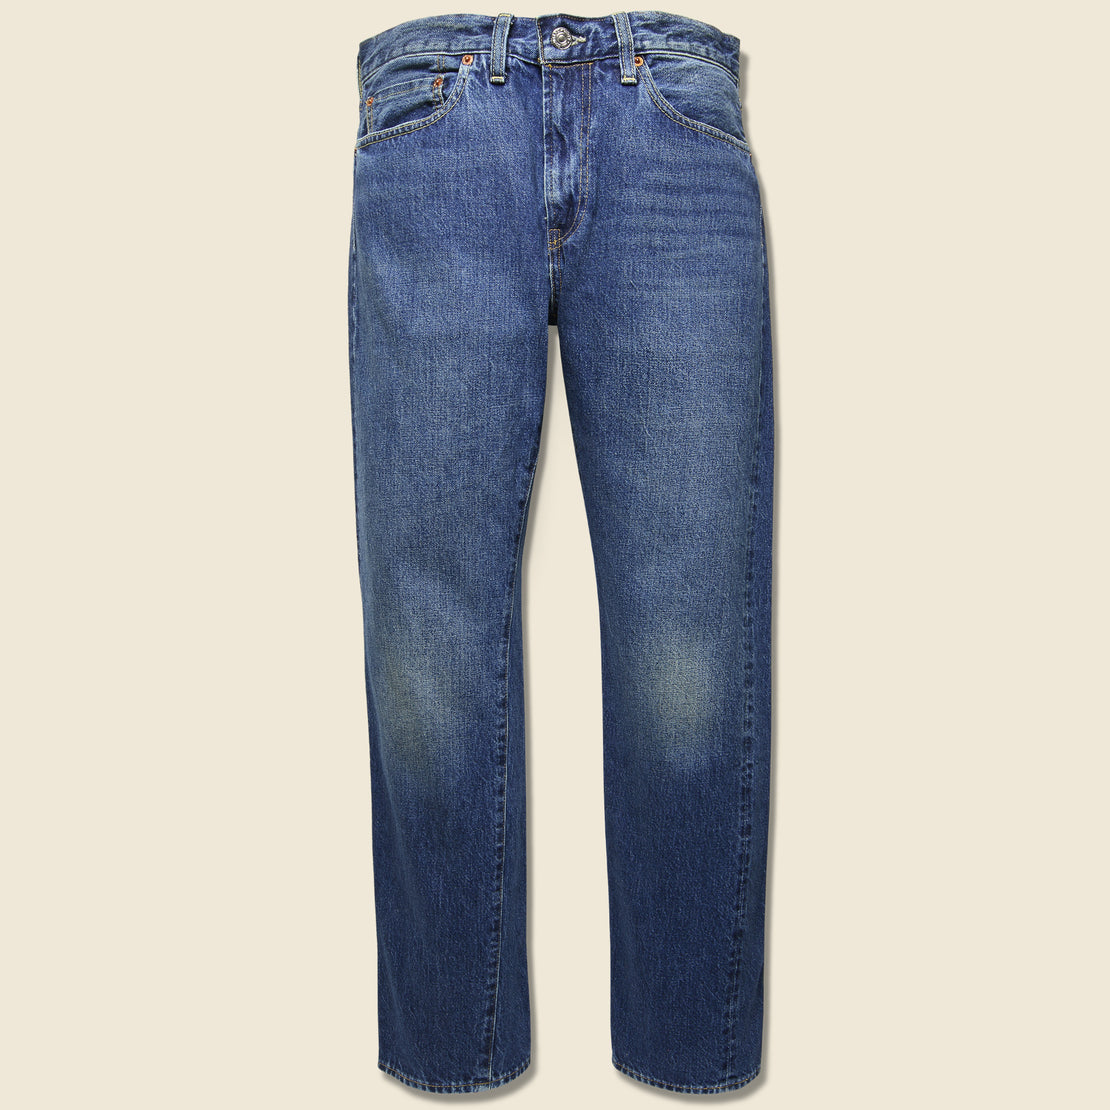 Levis Vintage Clothing 1954 501 Jean - Derby Day